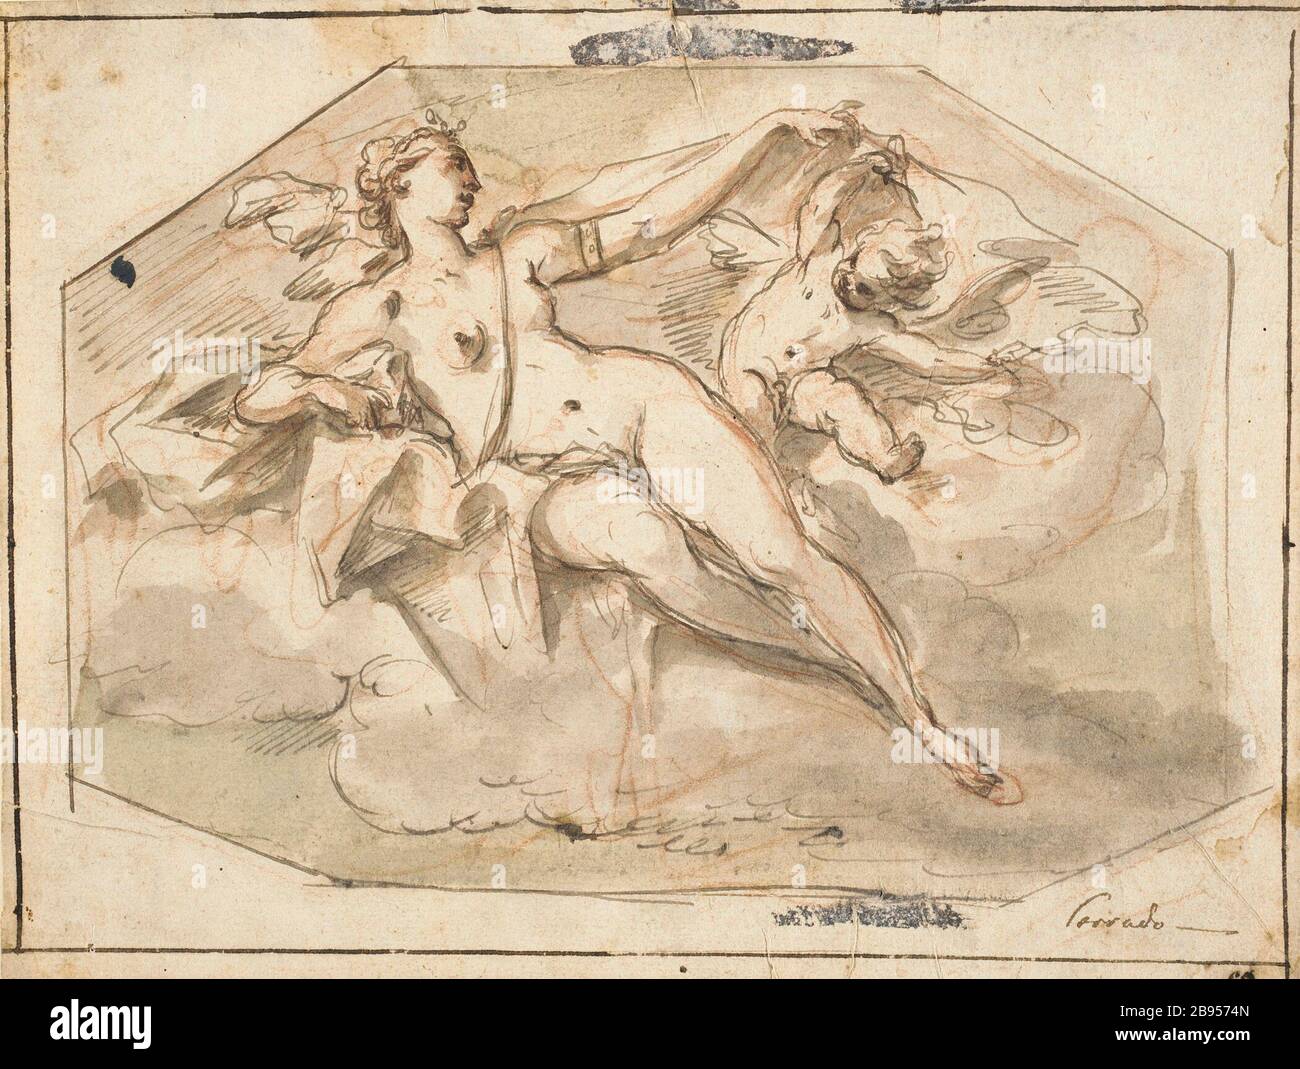 'Venus and Cupid; English:  Italy, circa 1746-1747 Drawings Sanguine with dark gray ink, gray and bluish wash Los Angeles County Fund (54.12.12) Prints and Drawings; between circa 1746 and circa 1747 date QS:P571,+1746-00-00T00:00:00Z/8,P1319,+1746-00-00T00:00:00Z/9,P1326,+1747-00-00T00:00:00Z/9,P1480,Q5727902; ' Stock Photo